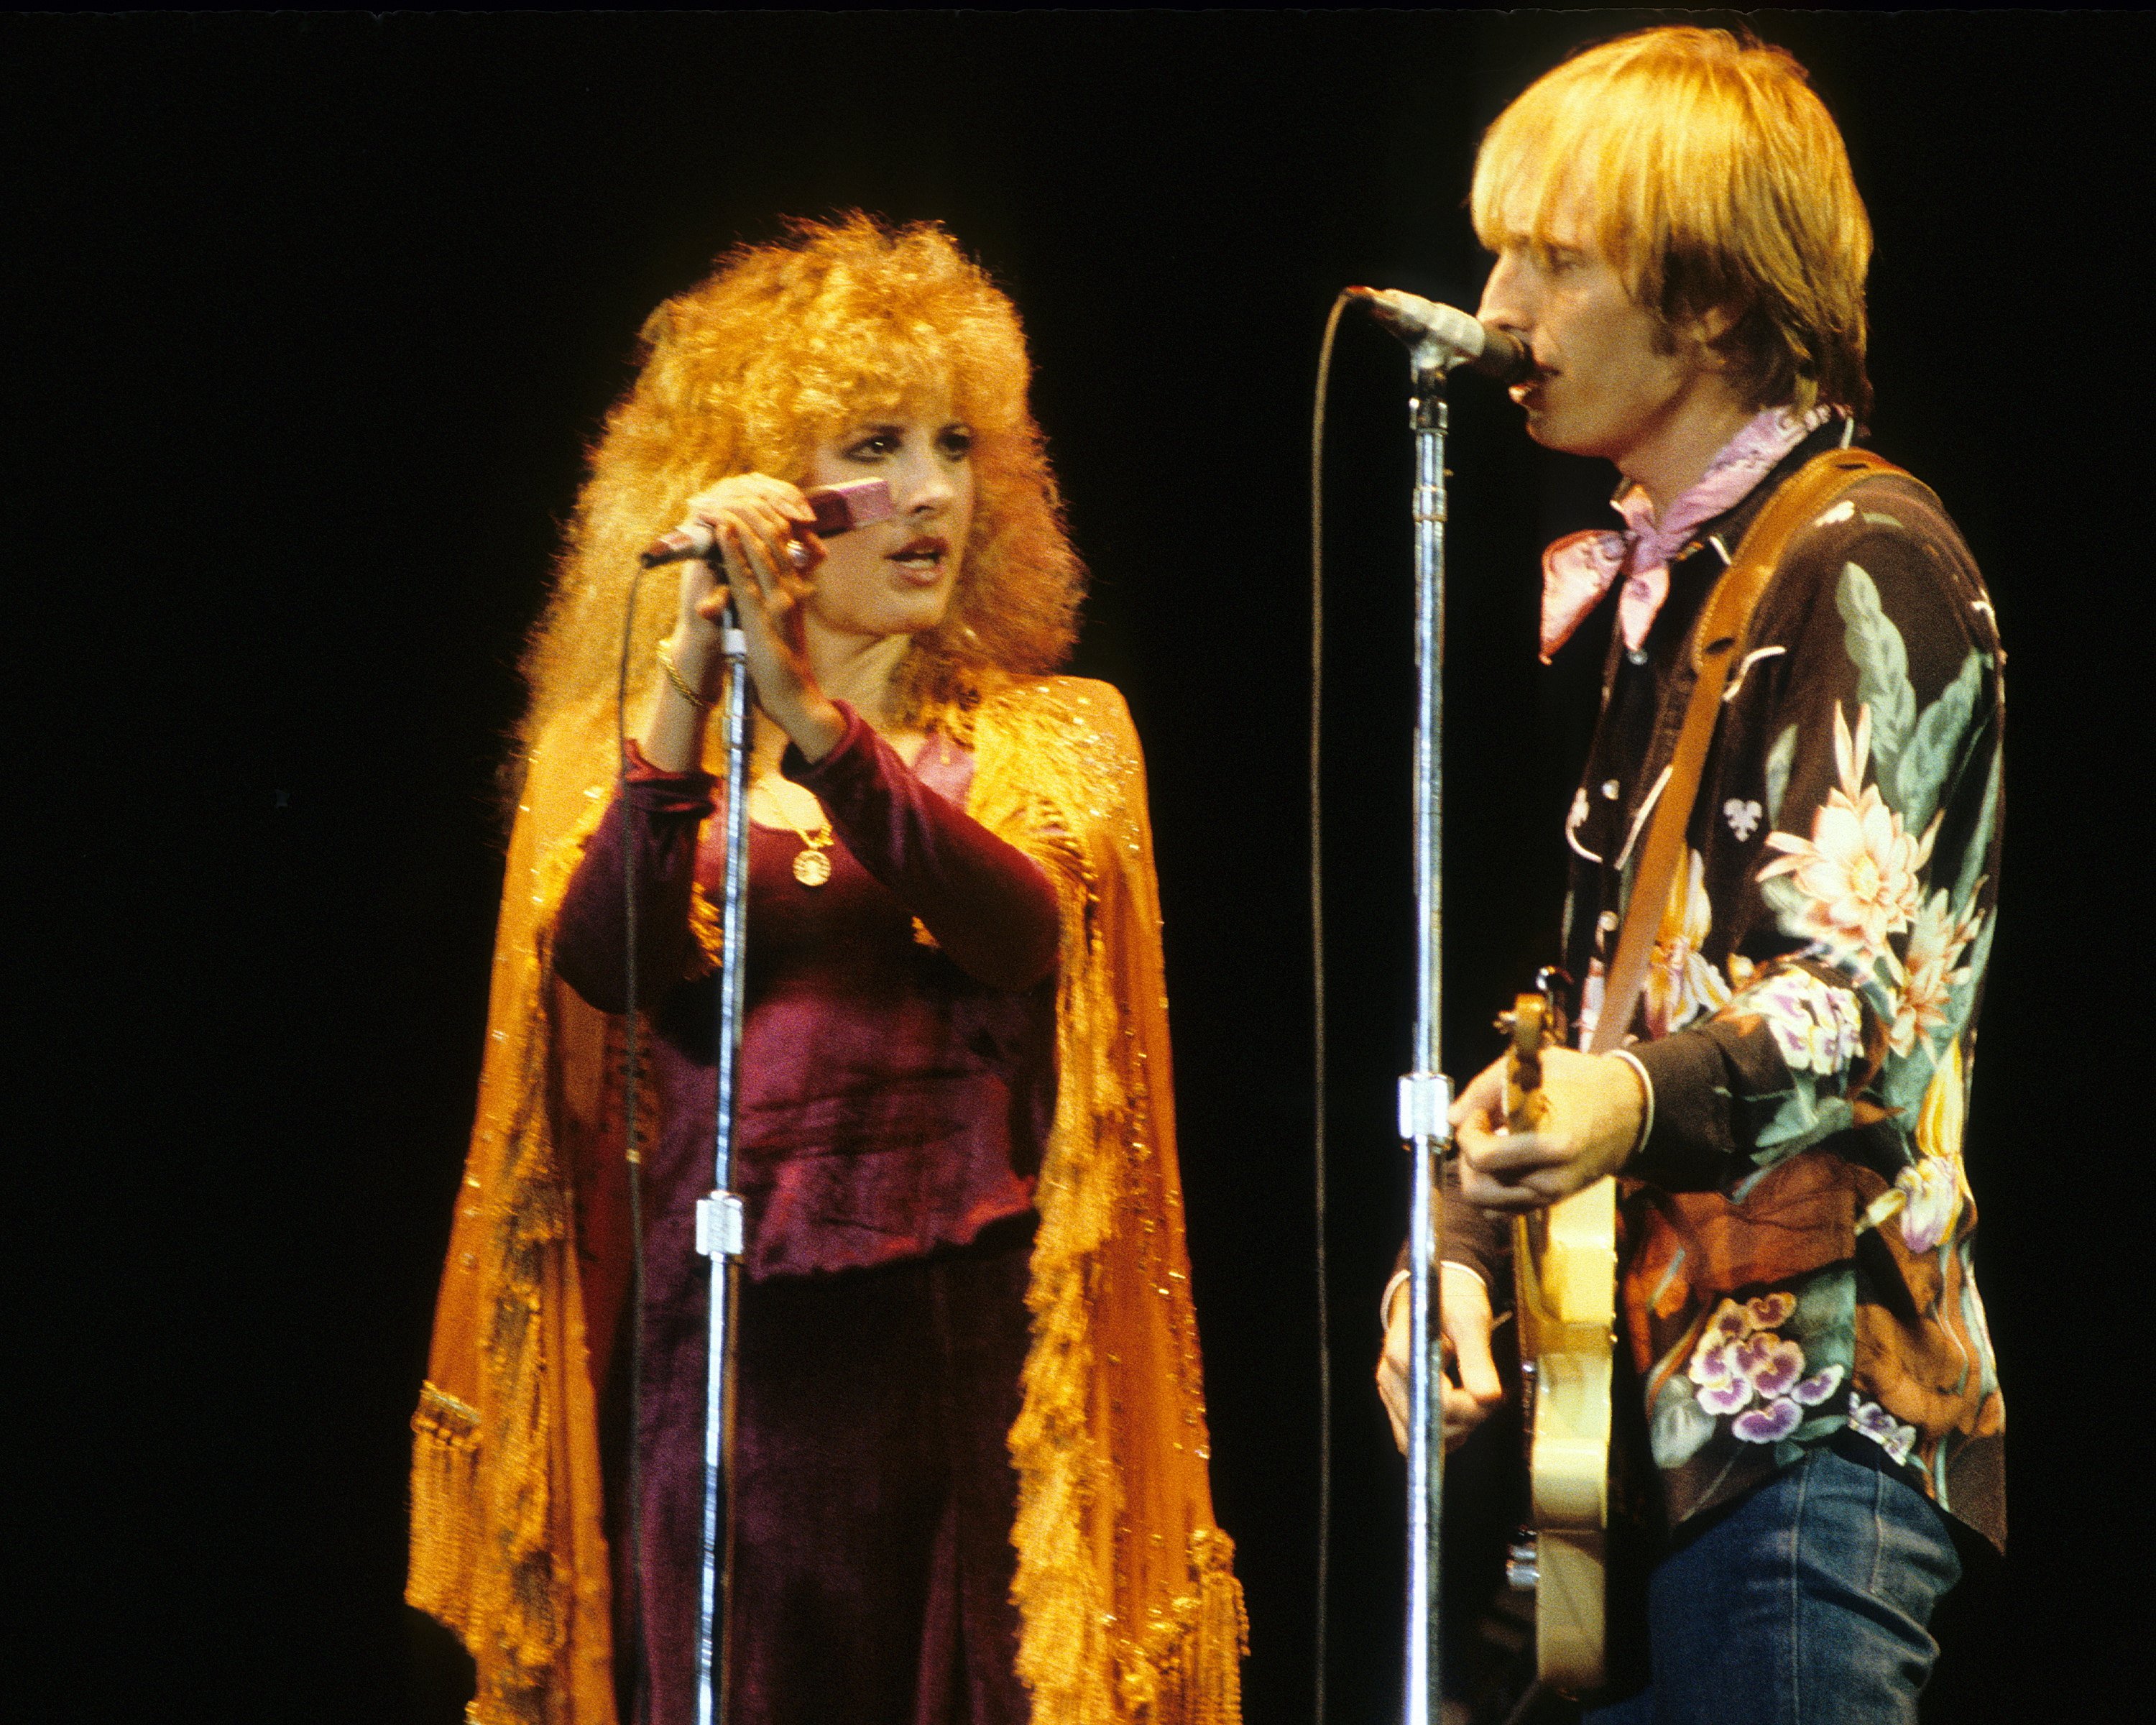 Stevie Nicks wears a shawl and holds a microphone. Tom Petty wears a floral shirt and plays guitar and sings into a microphone. 